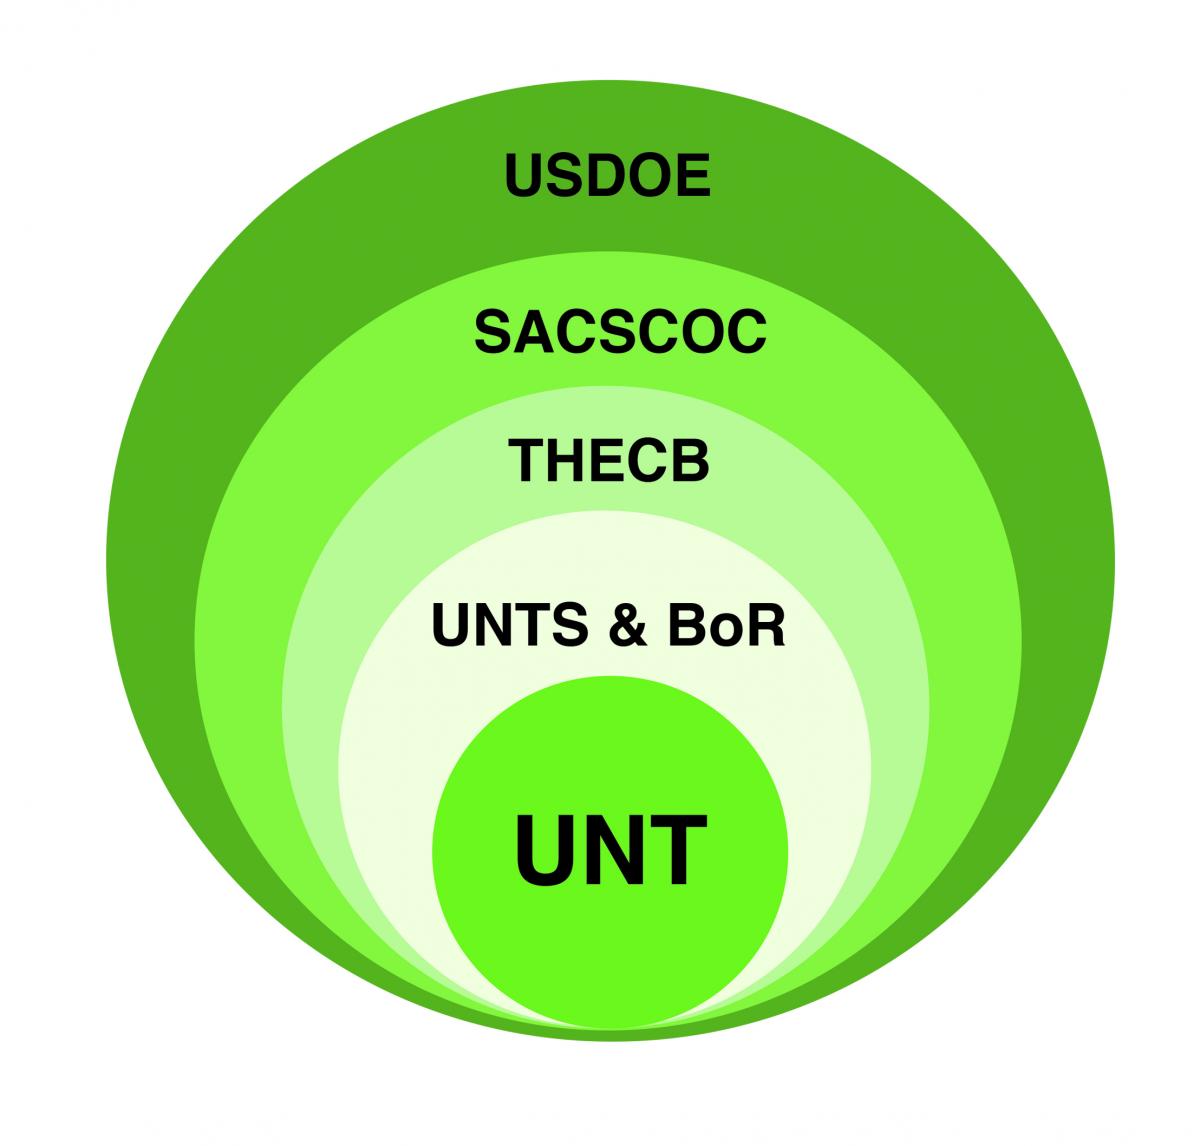 Illustrative graphic showing the relationship of the different college accreditation bodies.